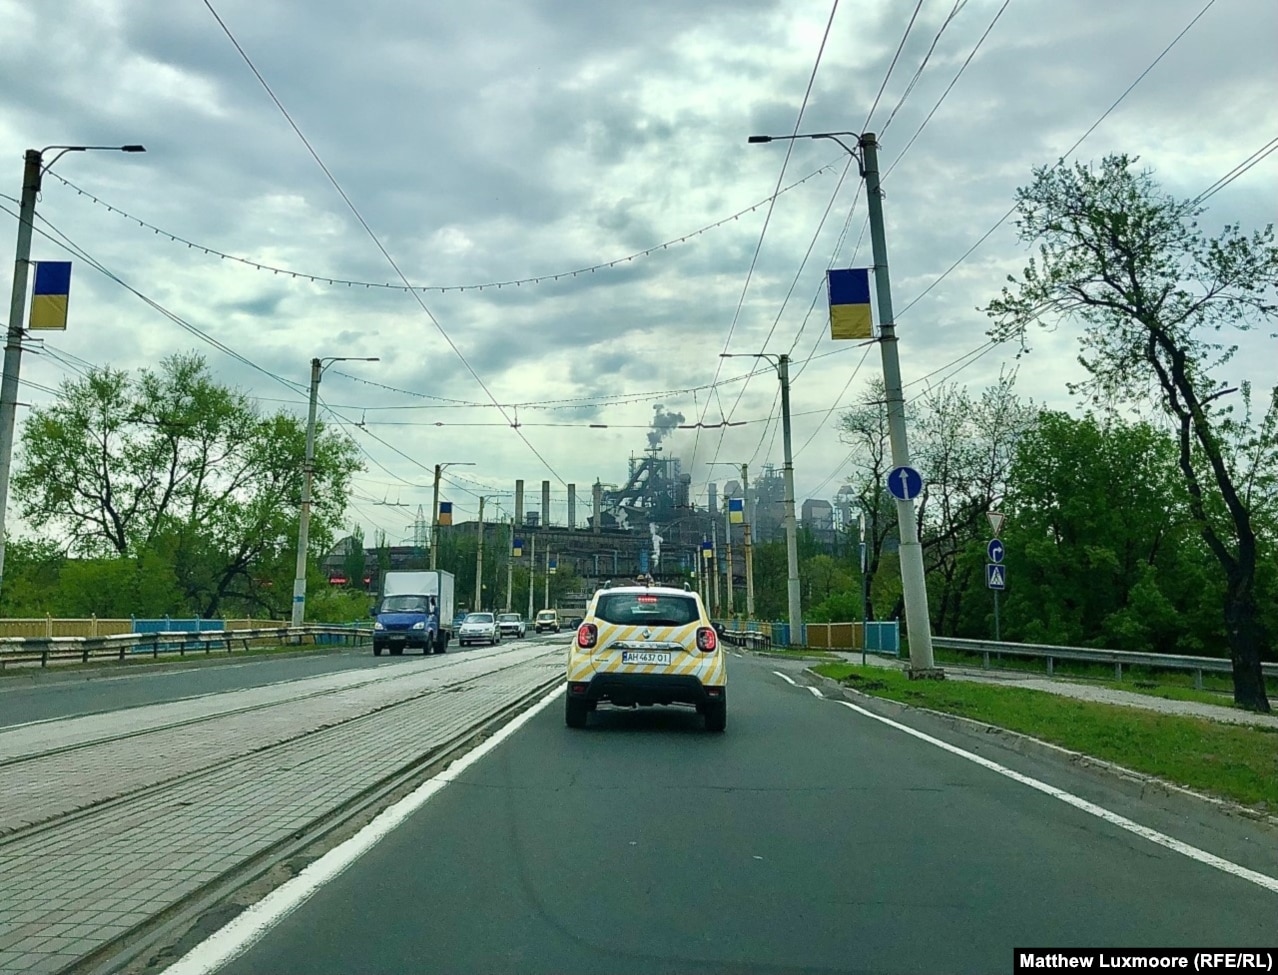 The Azovstal steelworks in Mariupol’s eastern district, where the muffled sounds of gunfire can be heard on some evenings